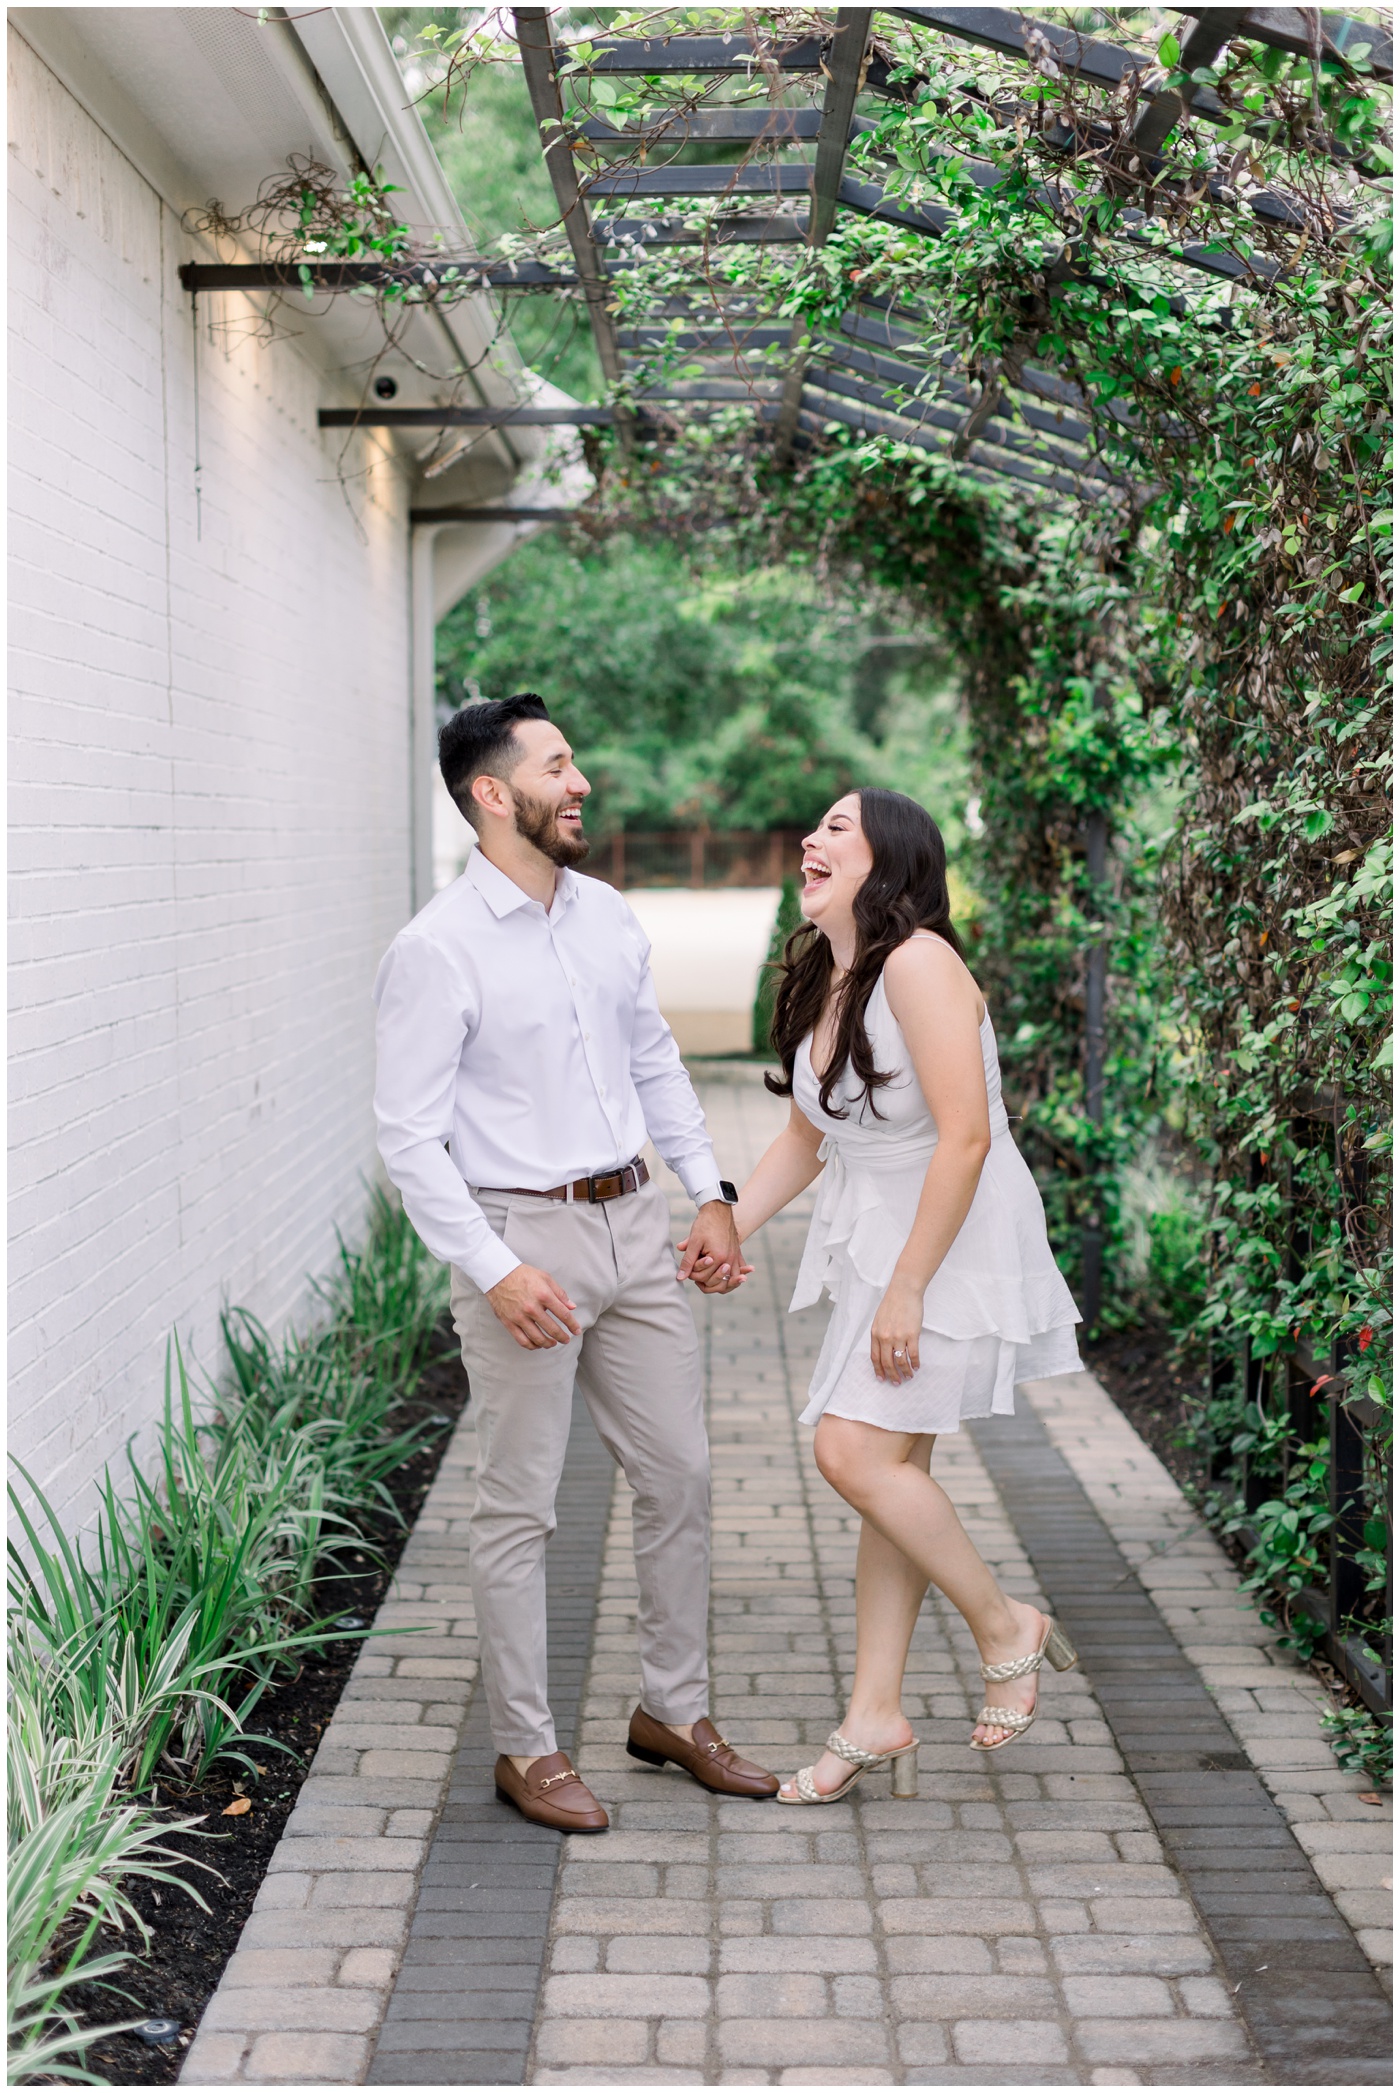 A couple laughs together at the Peach Orchard Venue.